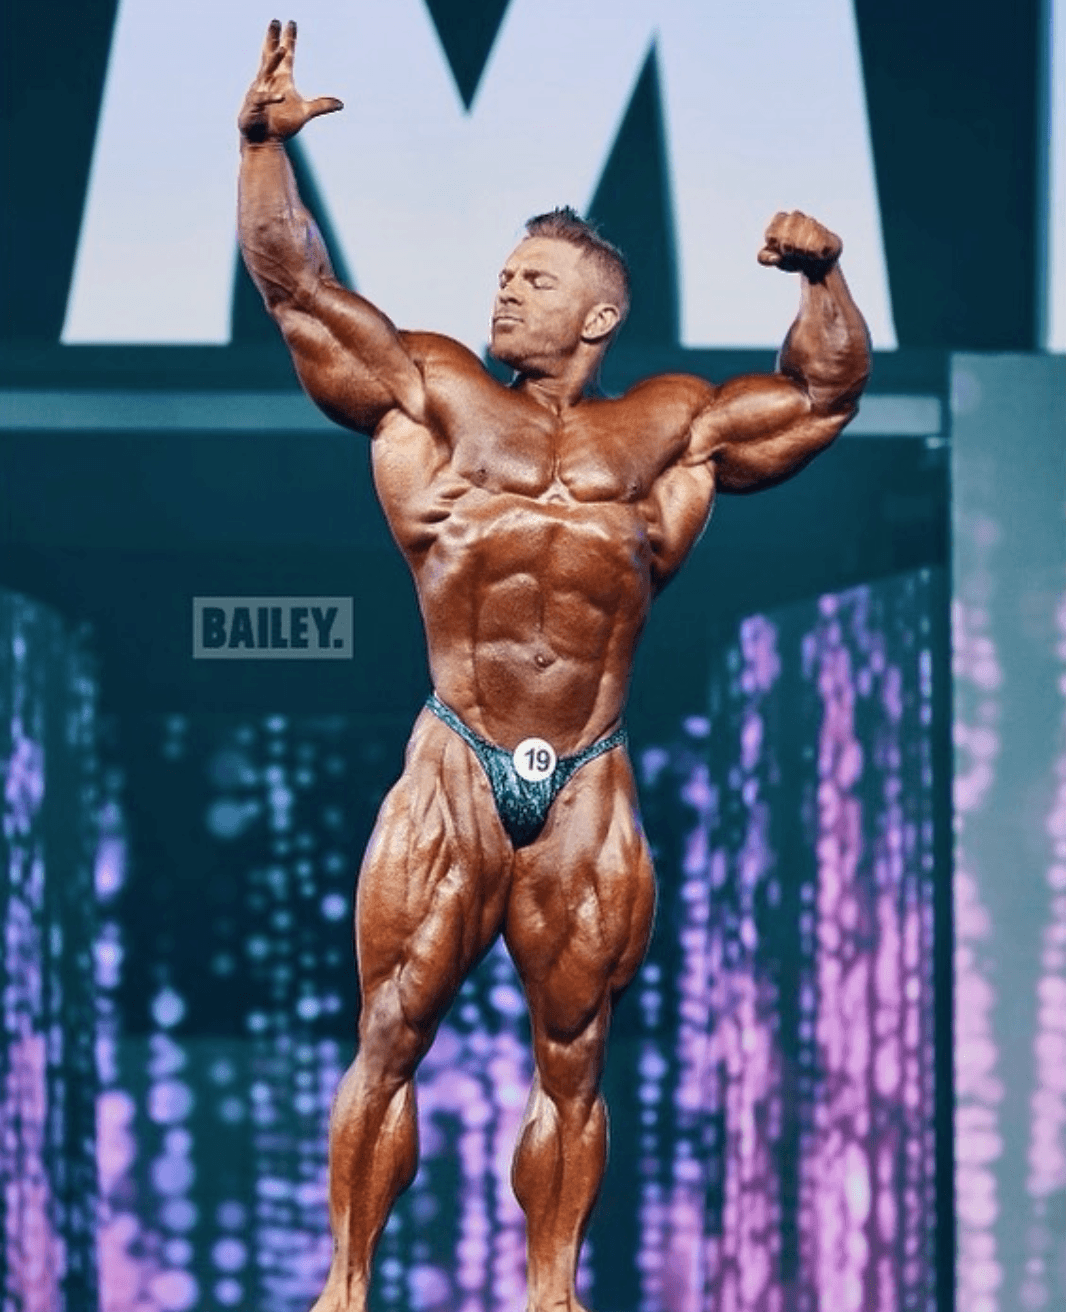 What’s Going On With Flex Lewis?